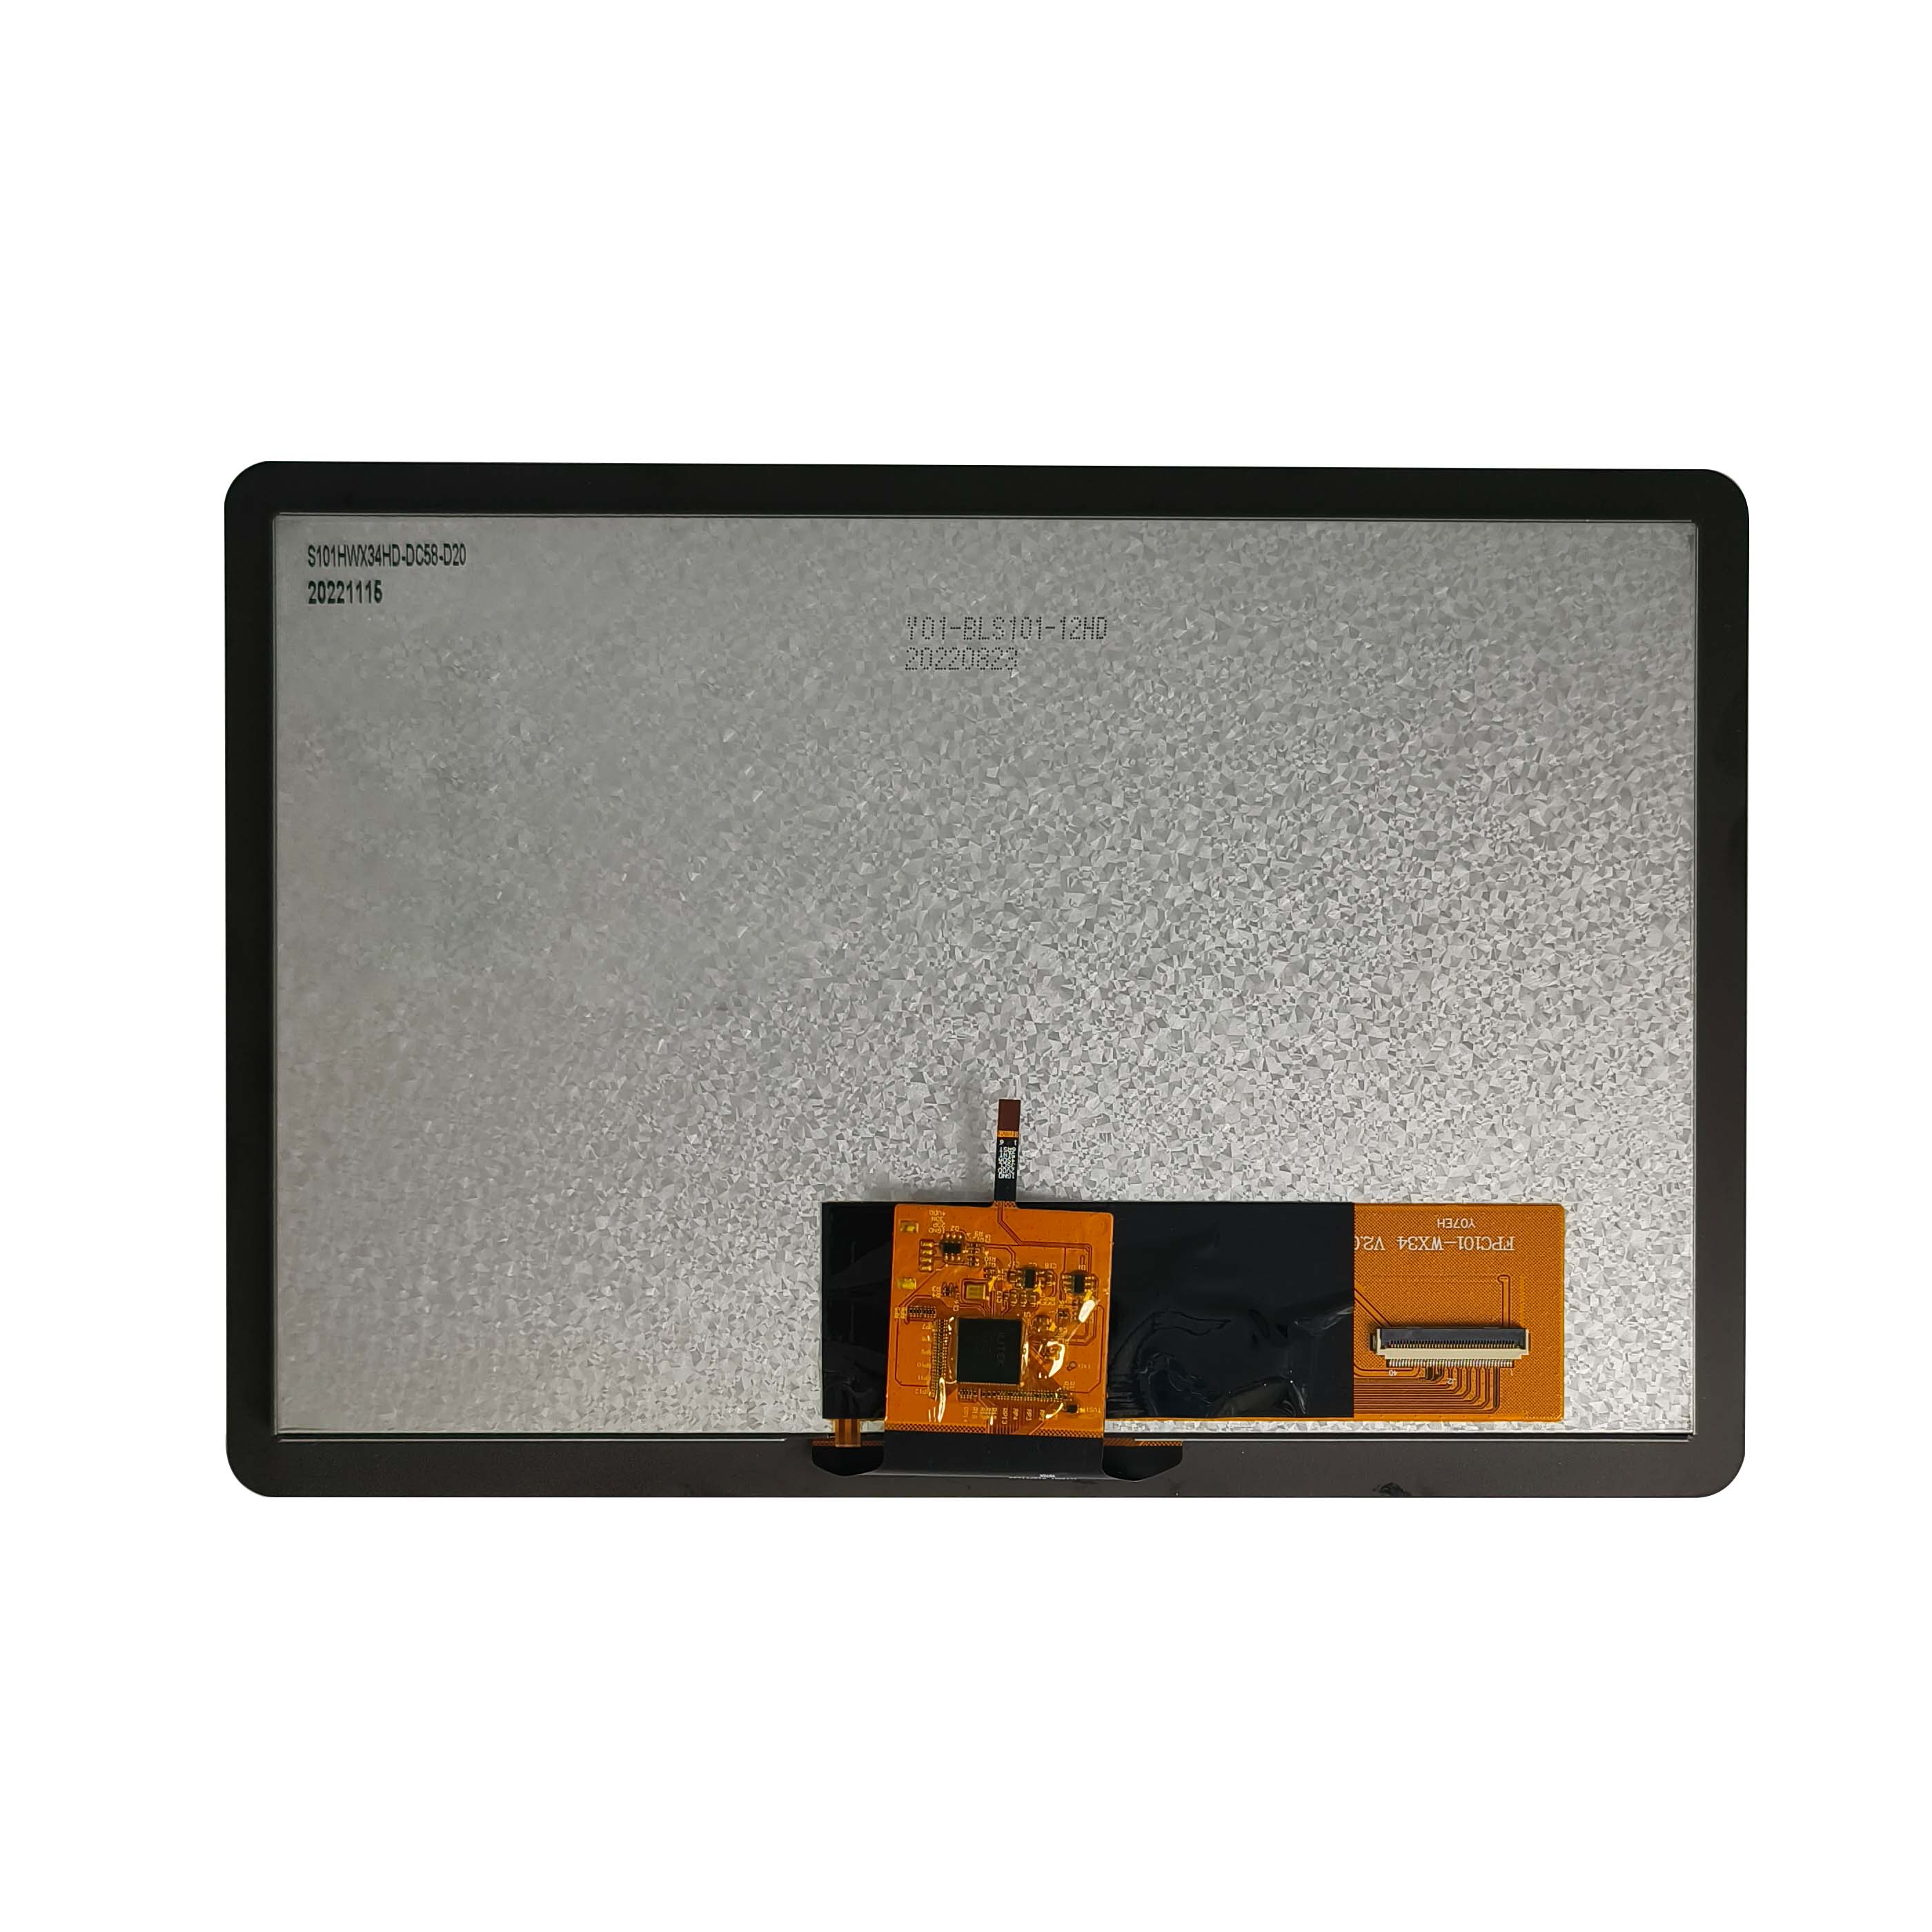 10.1inch 1280*800 Color TFT LCD Display with 400nits brightness